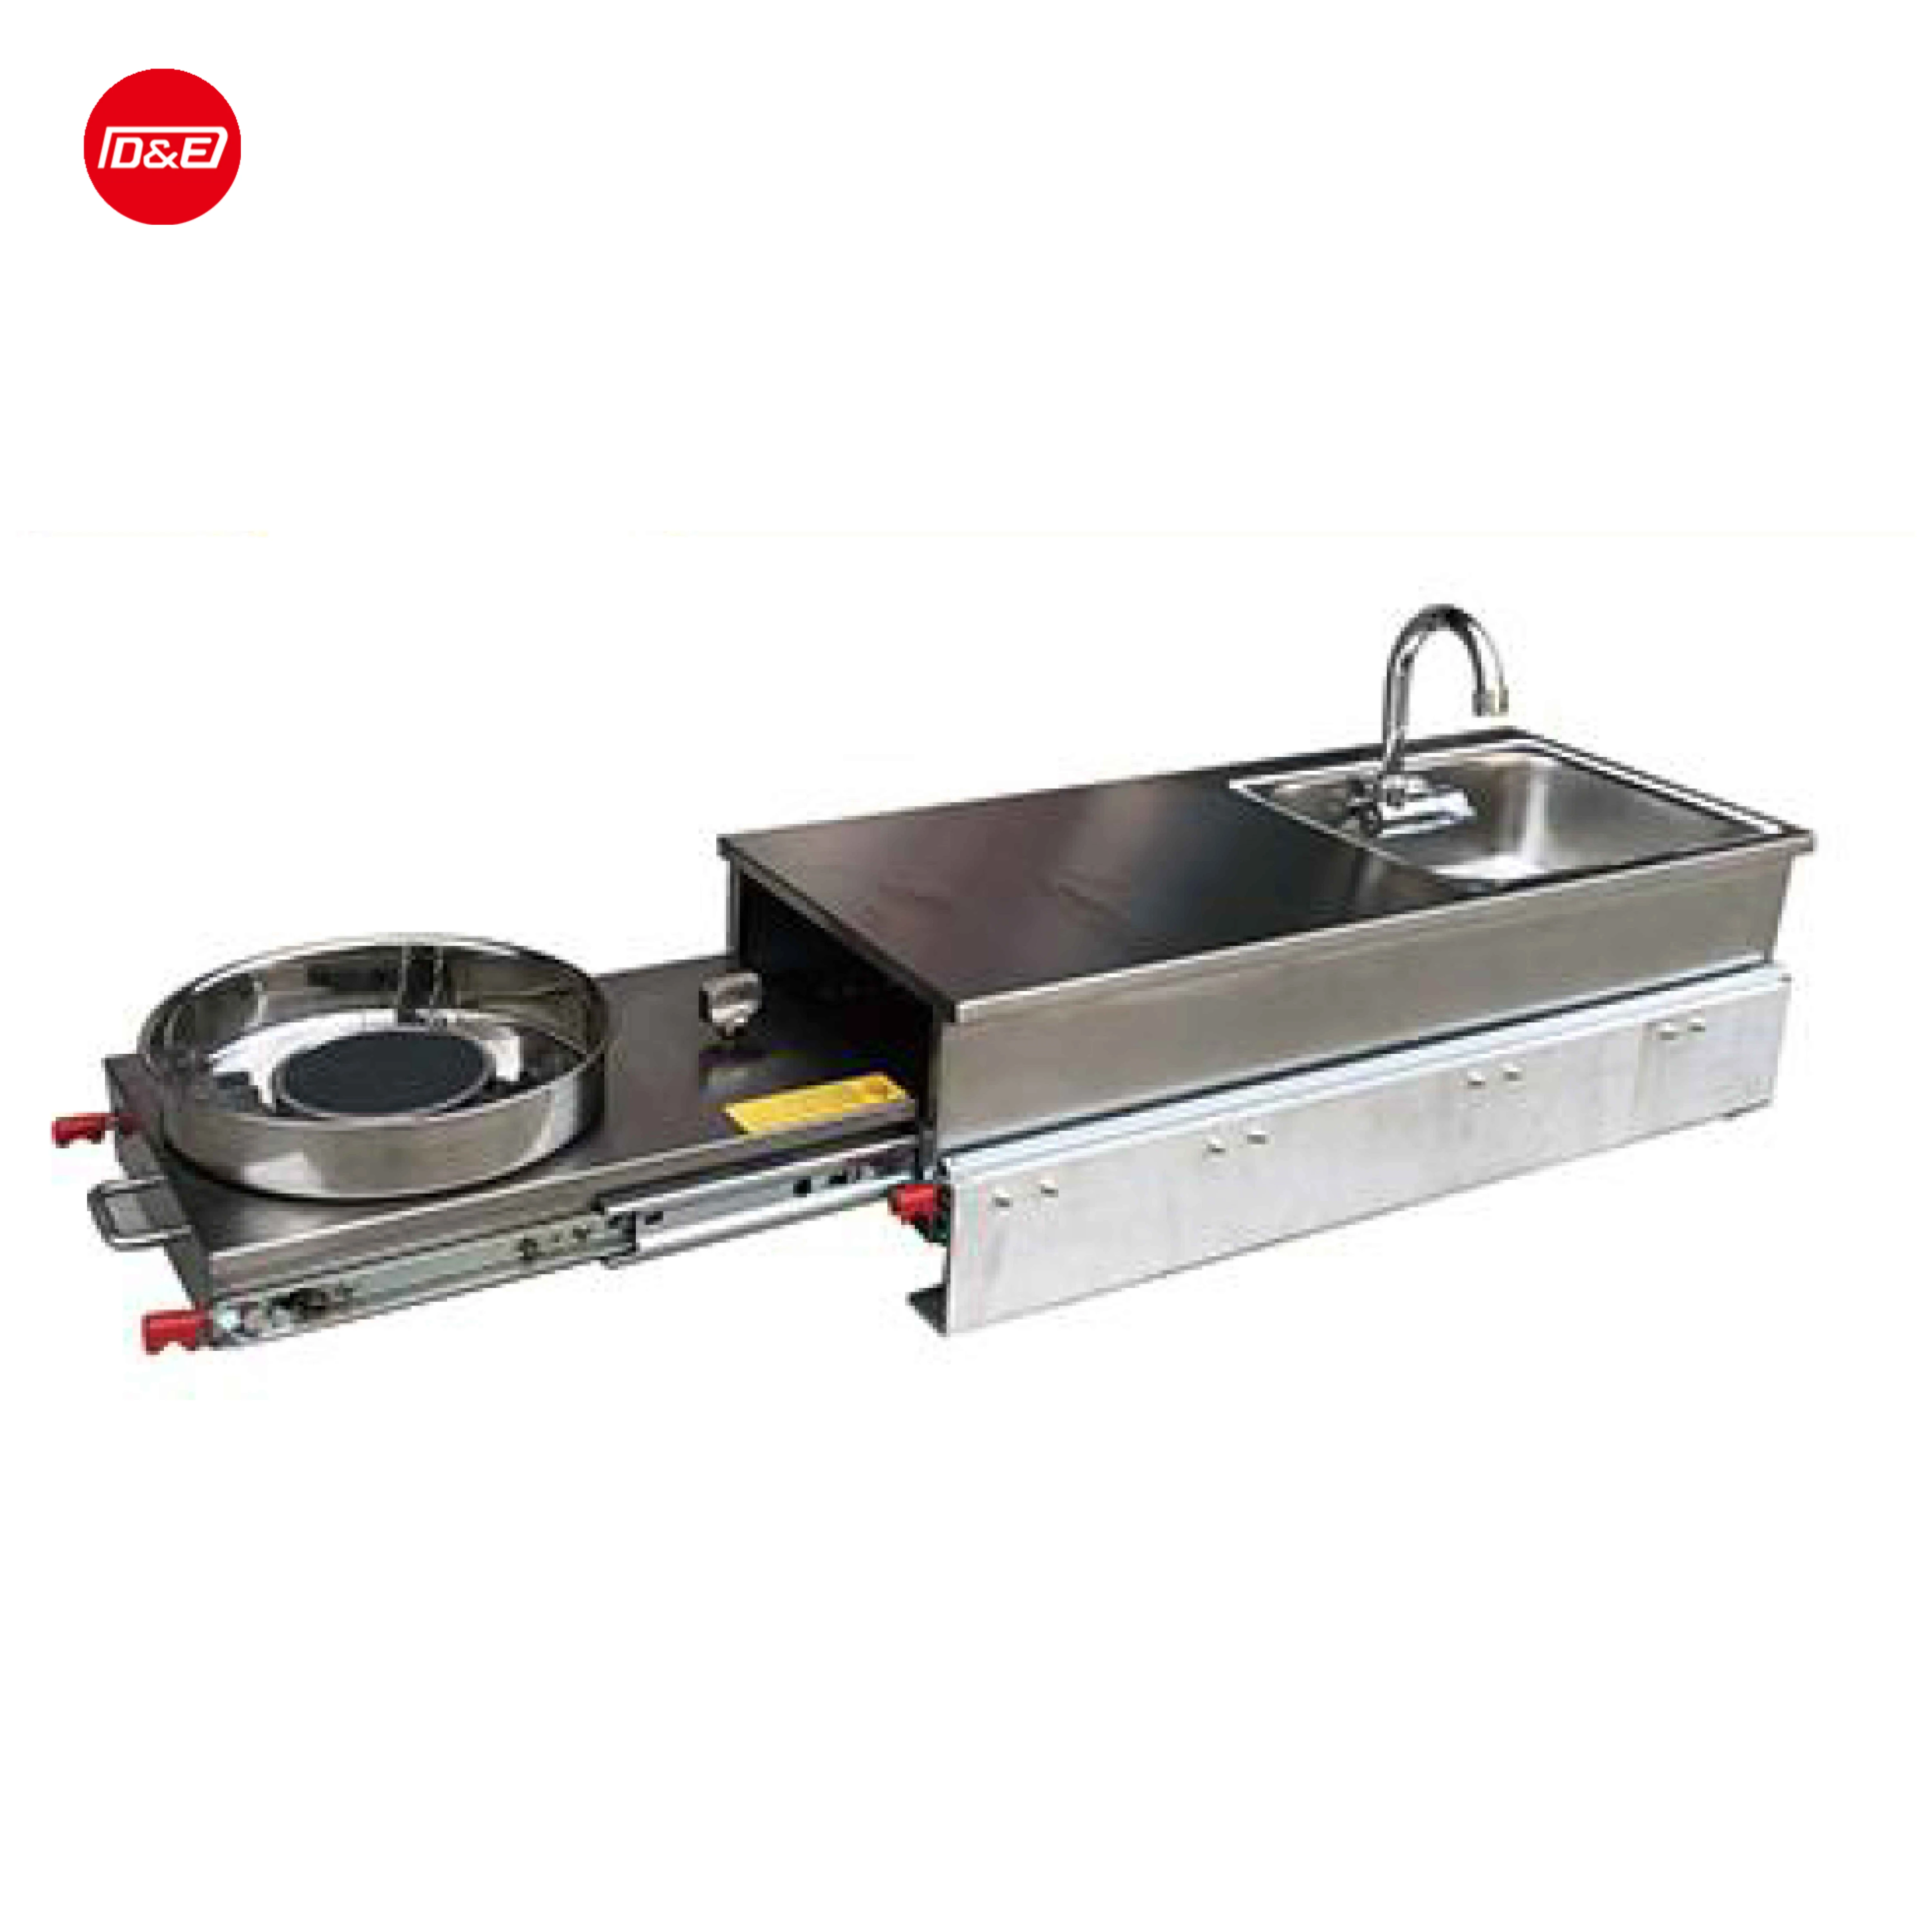 

RV Caravan Integrated Gas stove with sink faucet stainless steel C005 Trailer kitchen outdoor camping travel, Silver